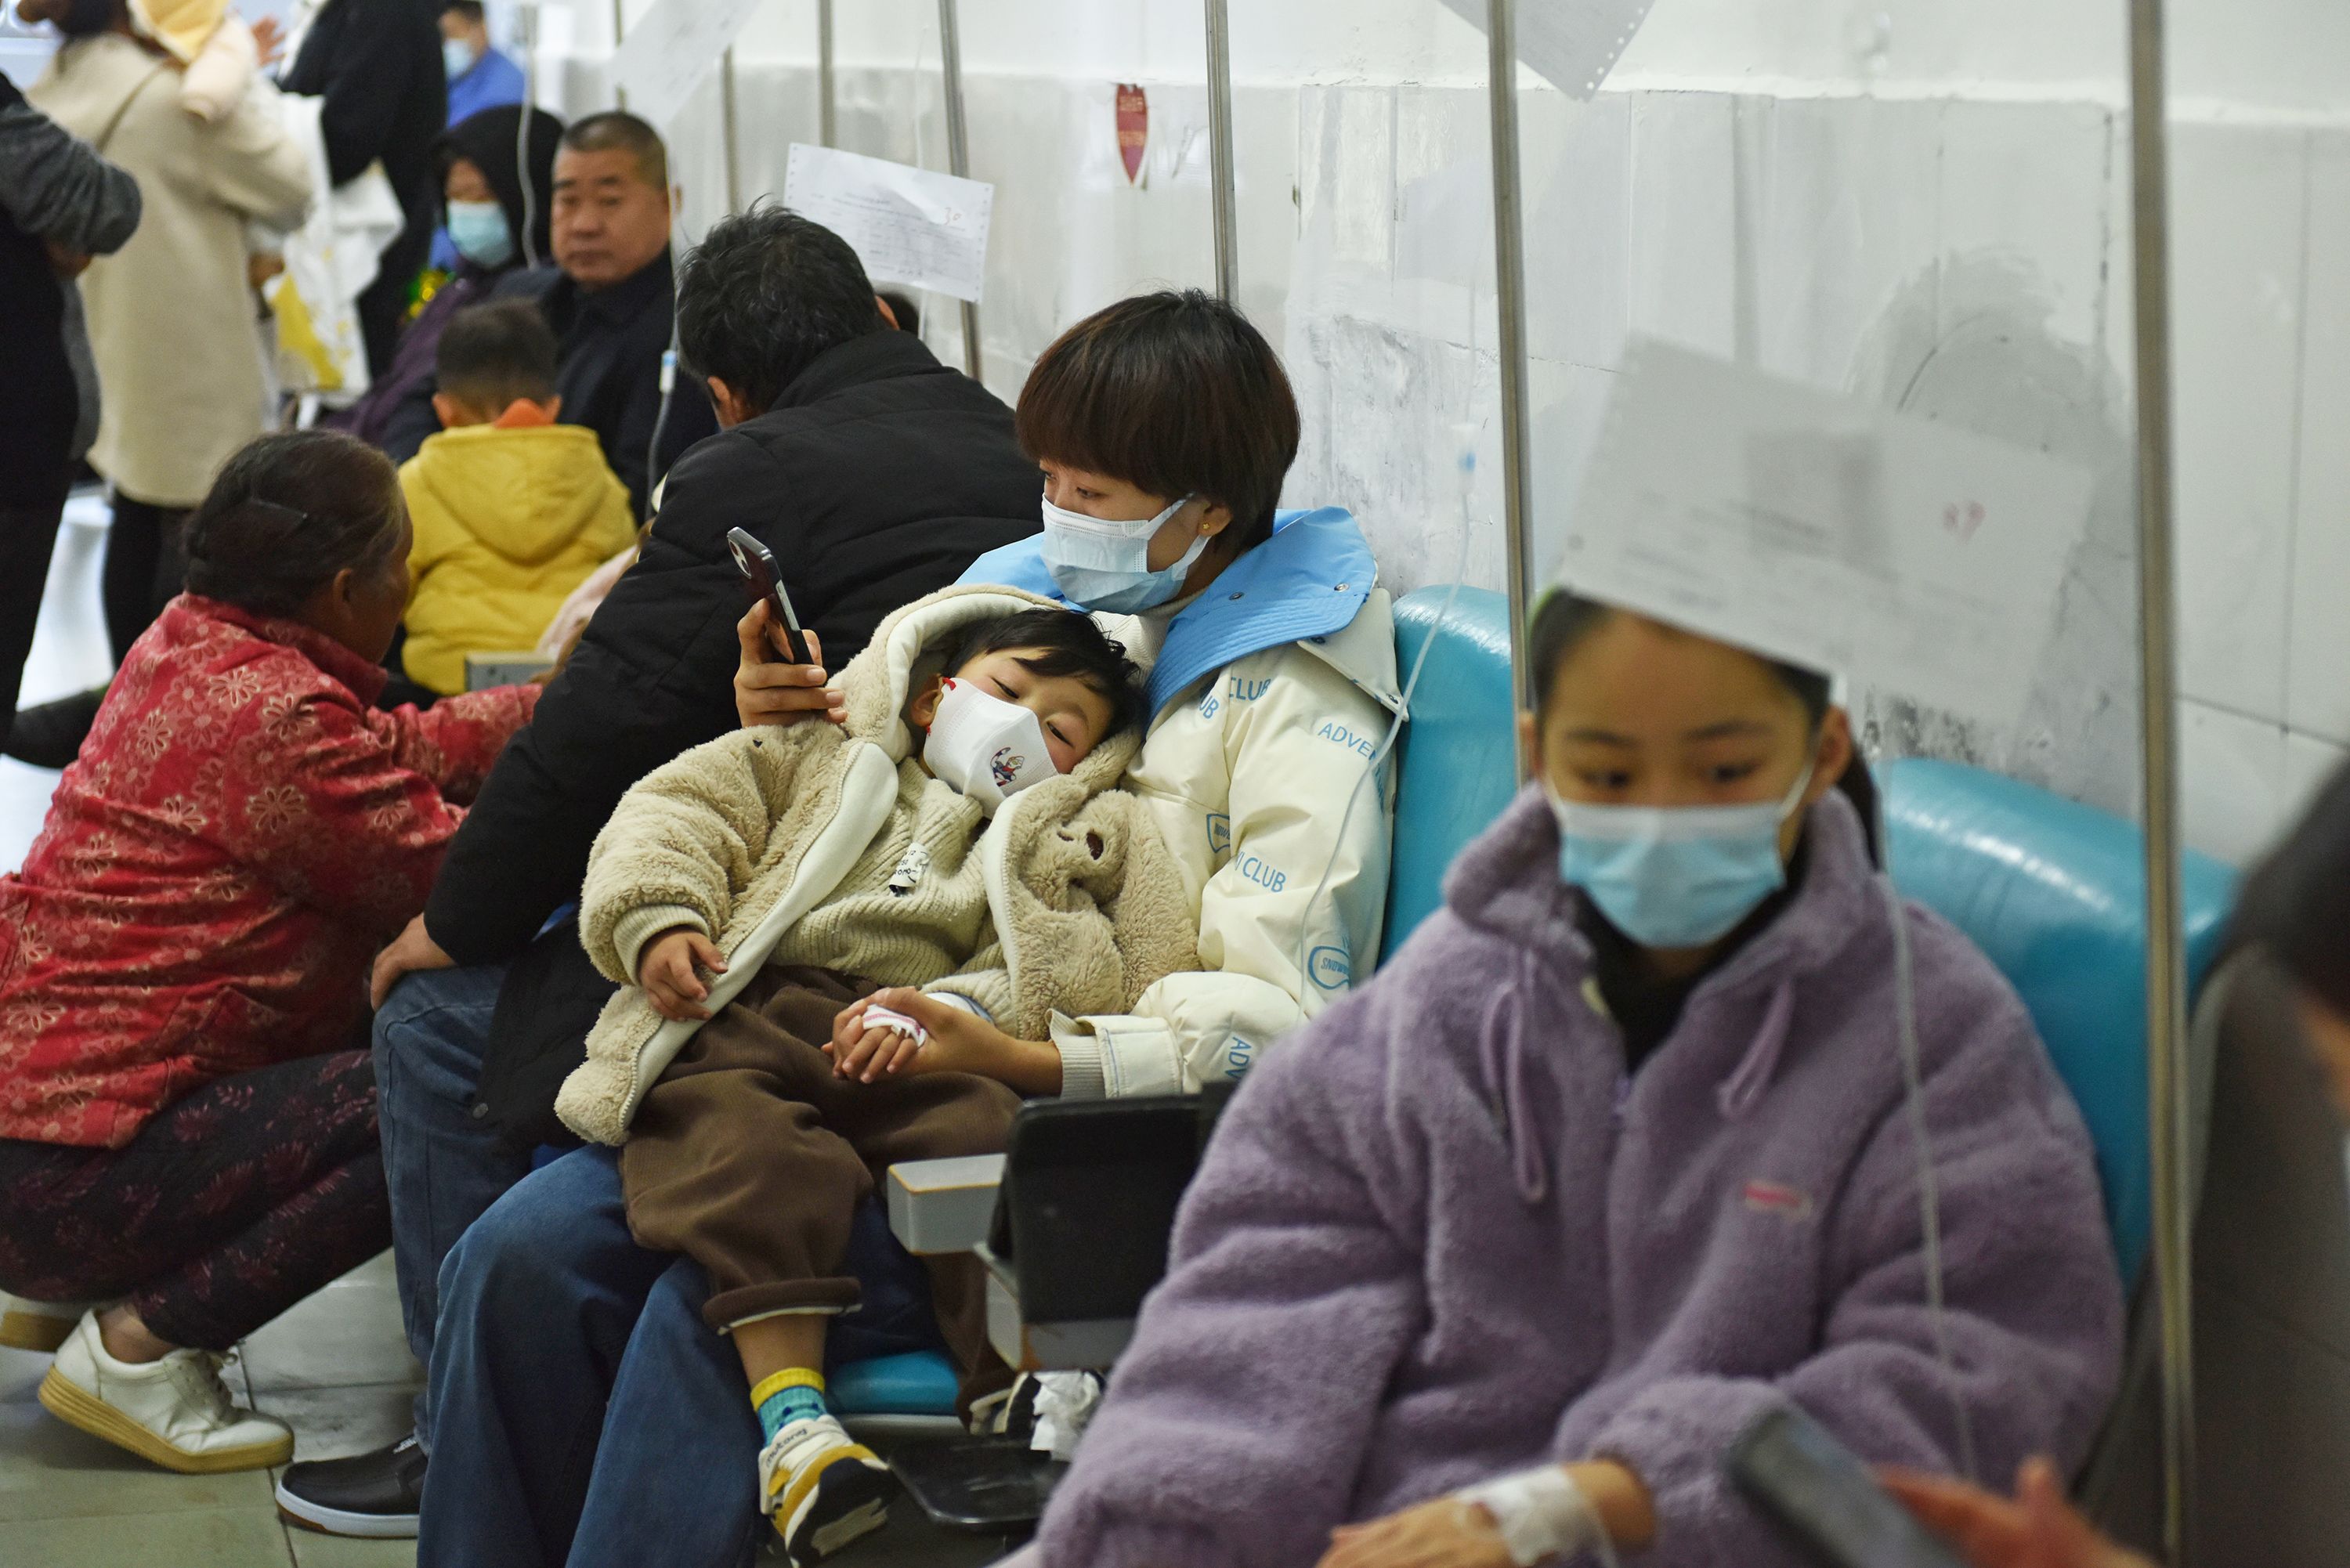 Sick children being accompanied by their parents receiving IV treatment at the Pediatric Department of People's Hospital in Fuyang, China, on November 28, 2023. (Photo by Costfoto/NurPhoto, Getty Images)